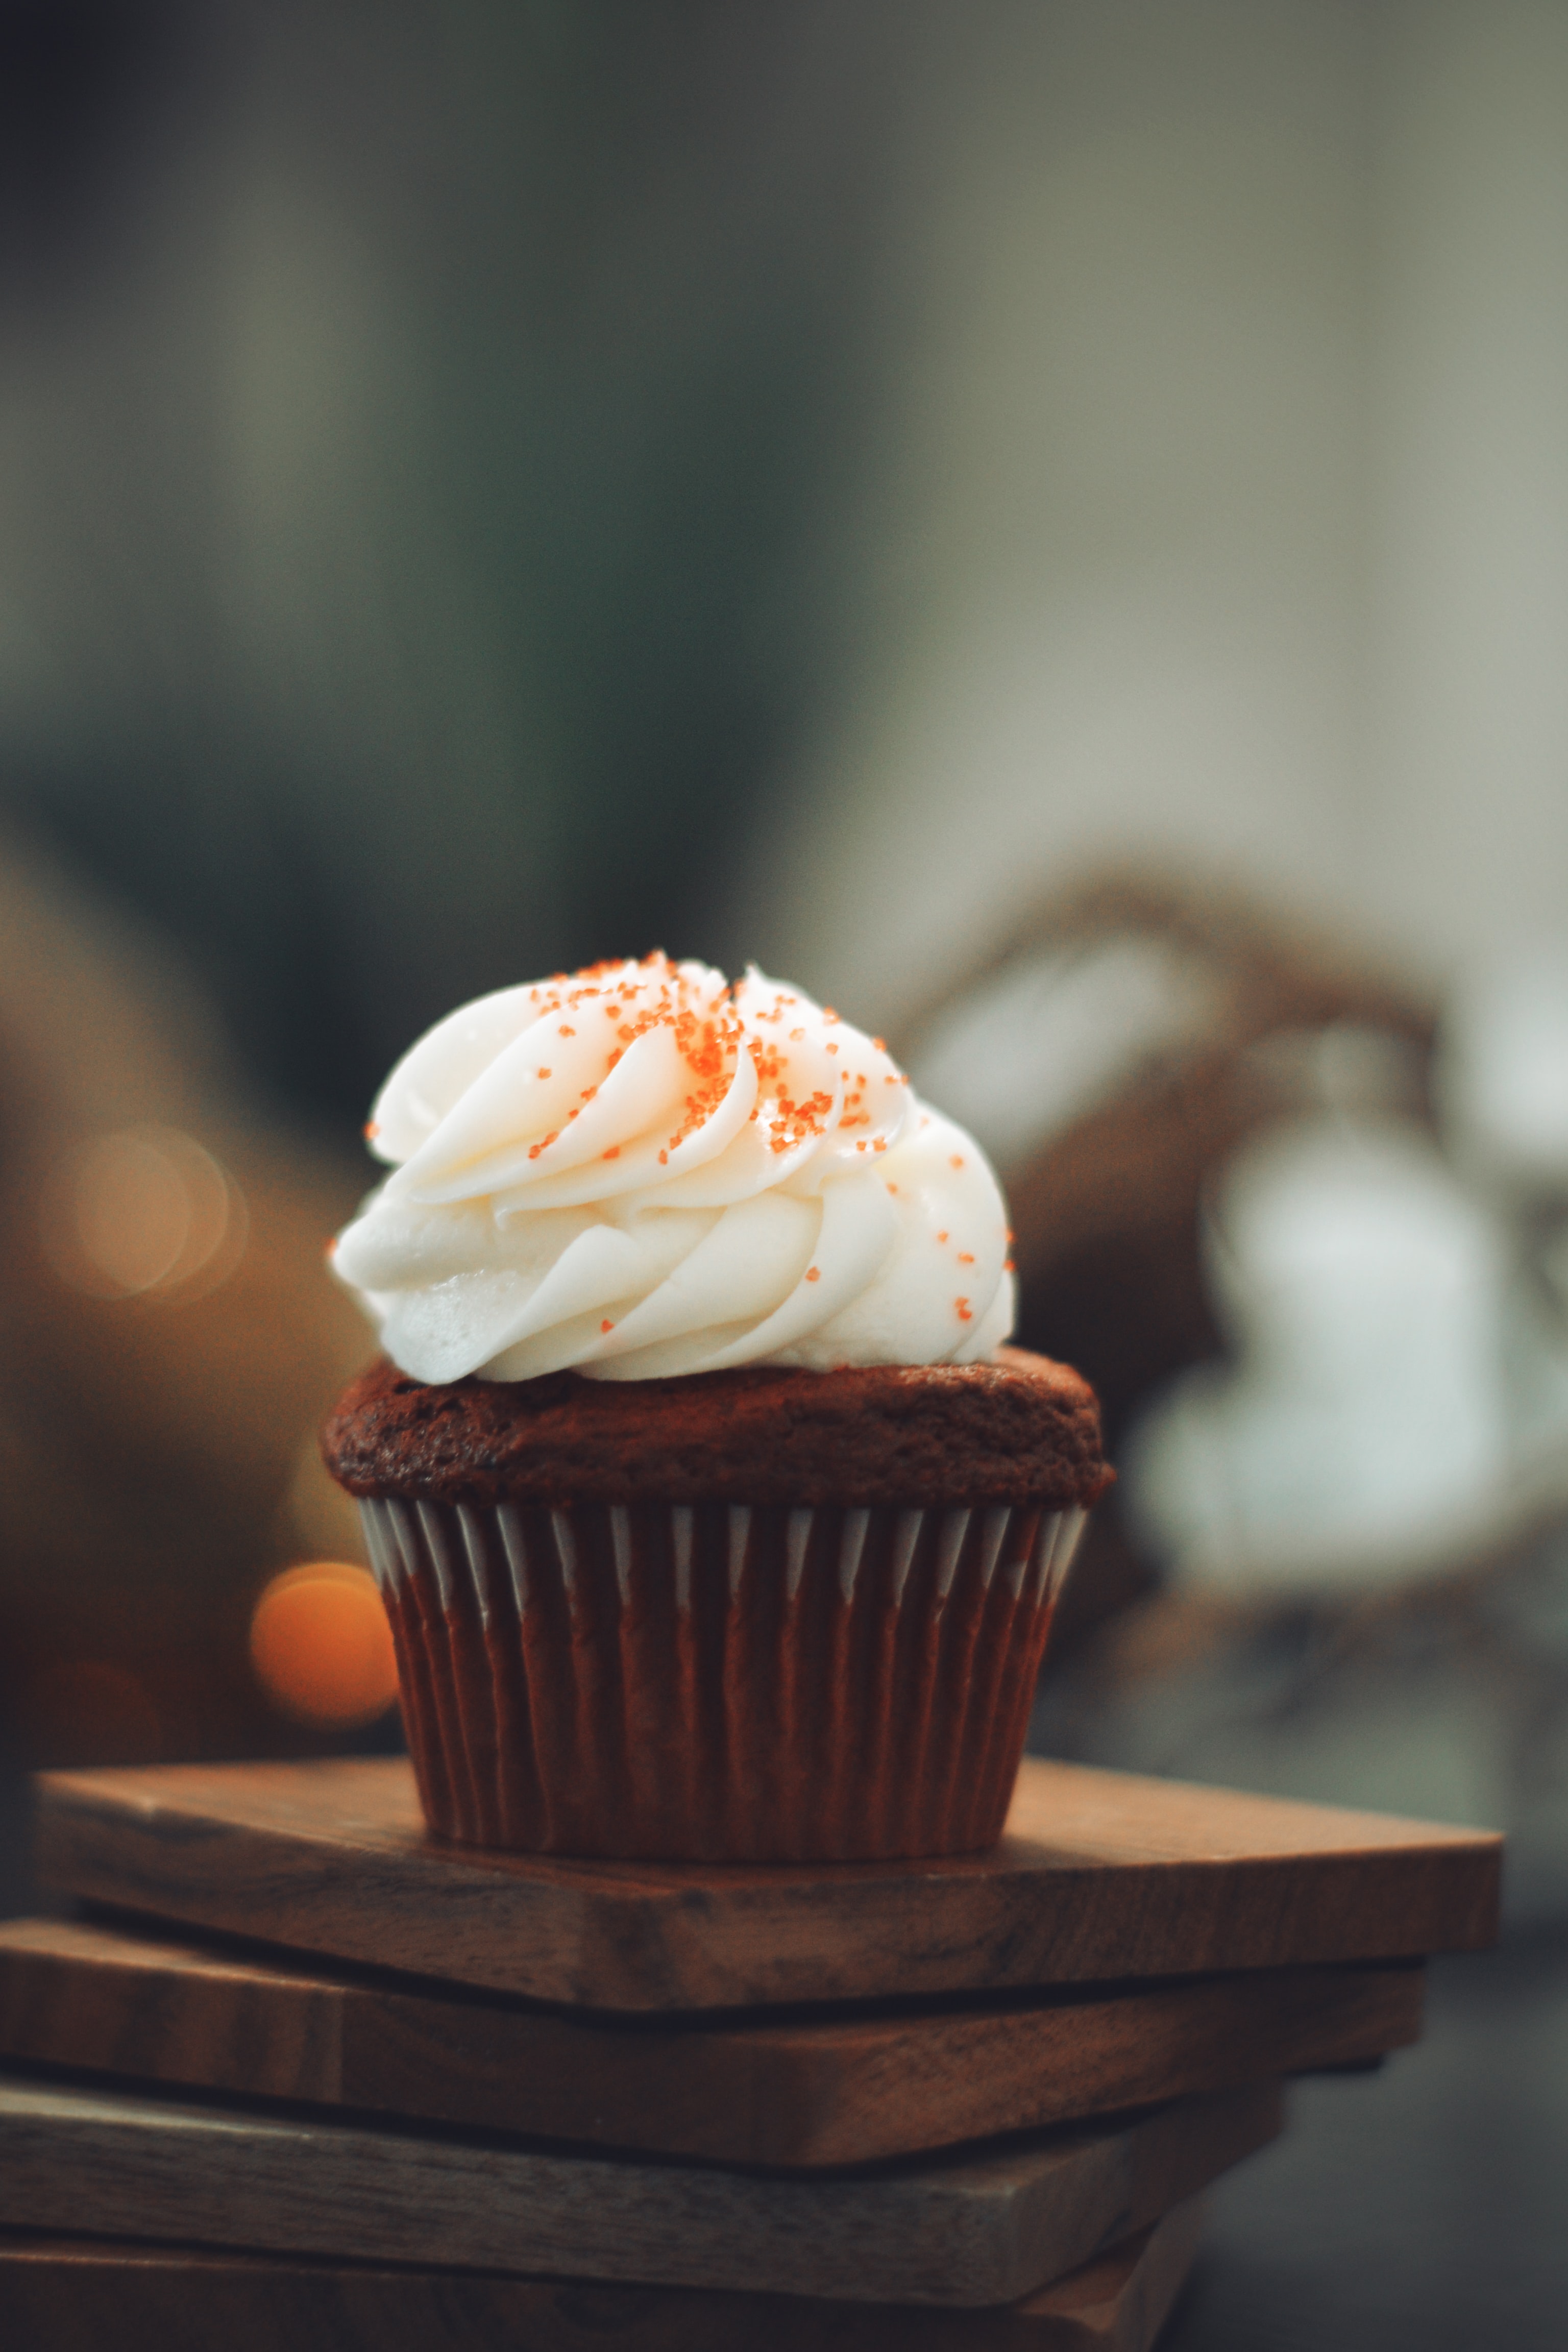 desert, food, sweet, bakery products, baking, cupcake, cooking, cookery download HD wallpaper